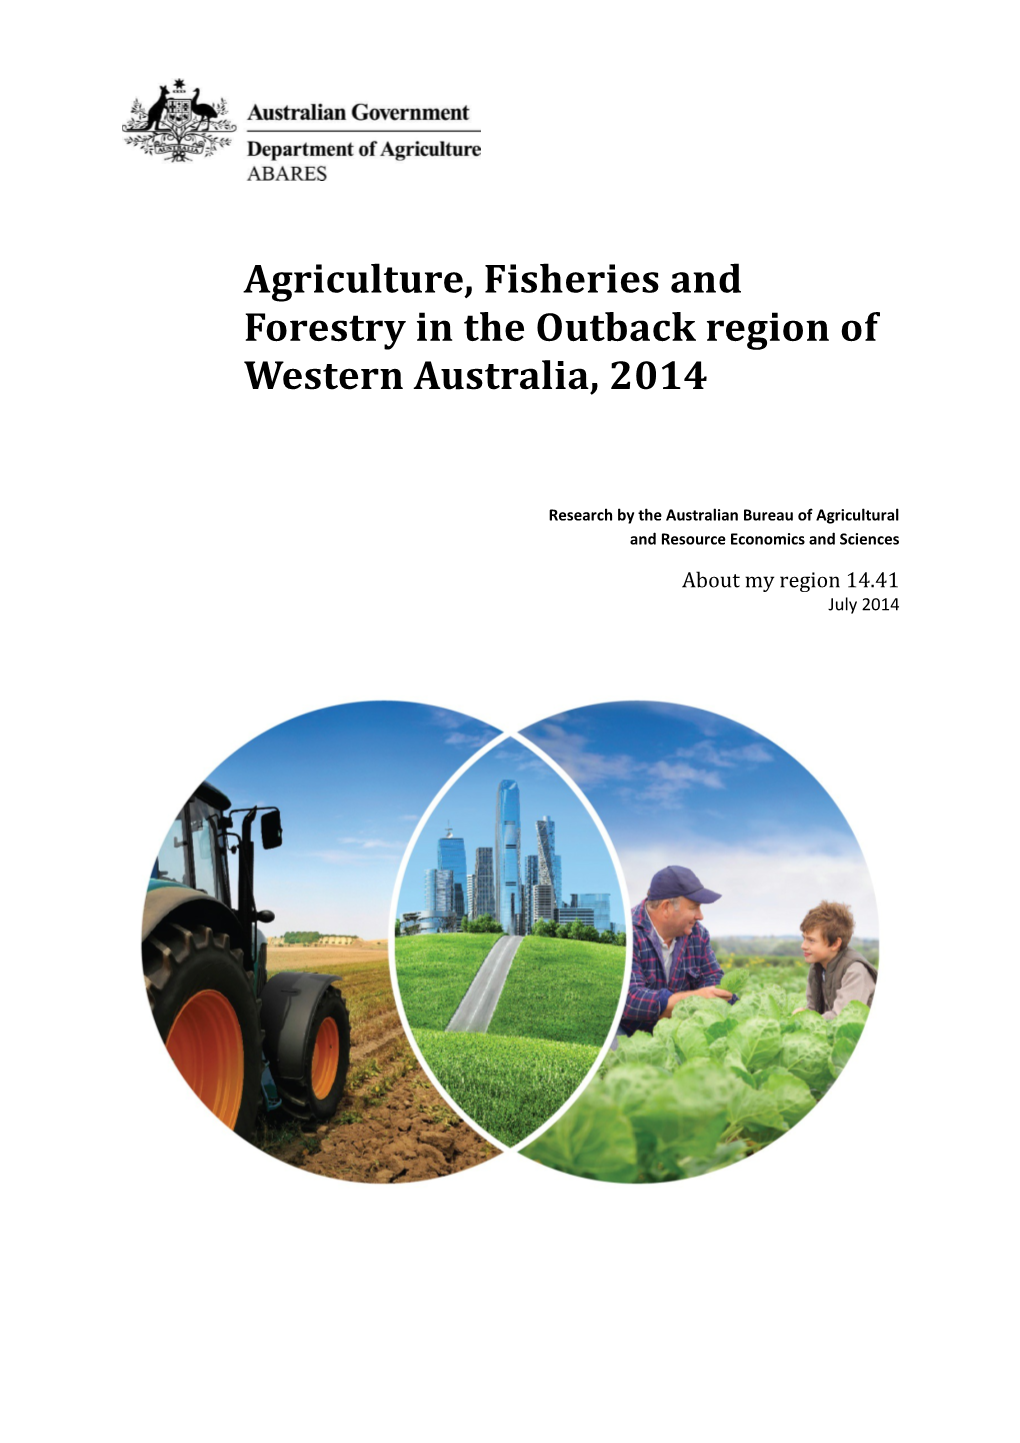 Agriculture, Fisheries and Forestry in the Outback Region of Western Australia, 2014